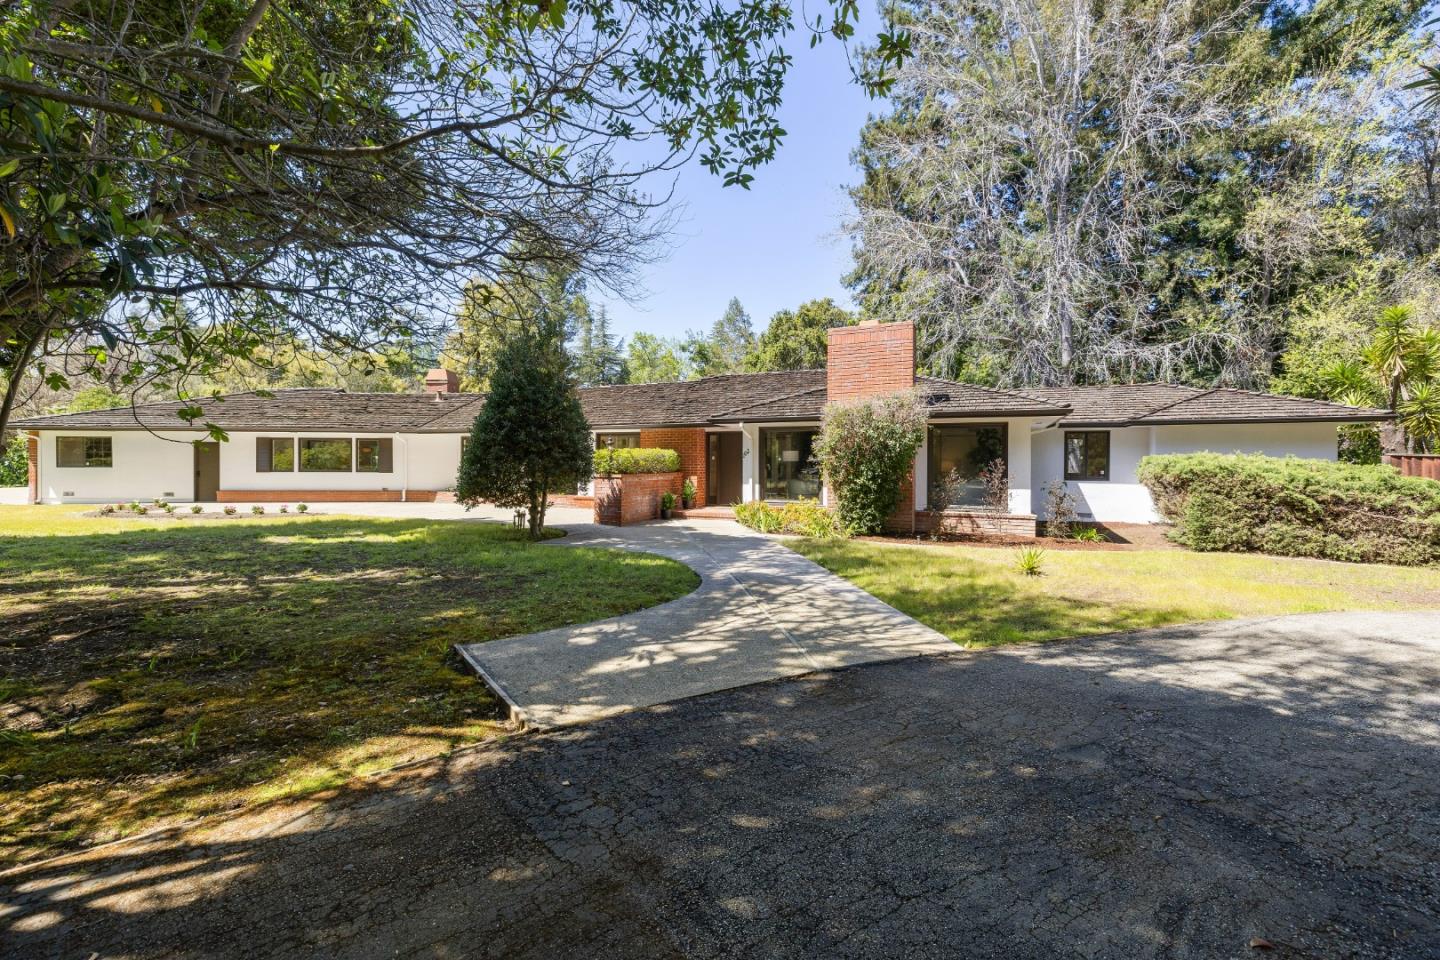 Photo of 102 Linden Ave in Atherton, CA